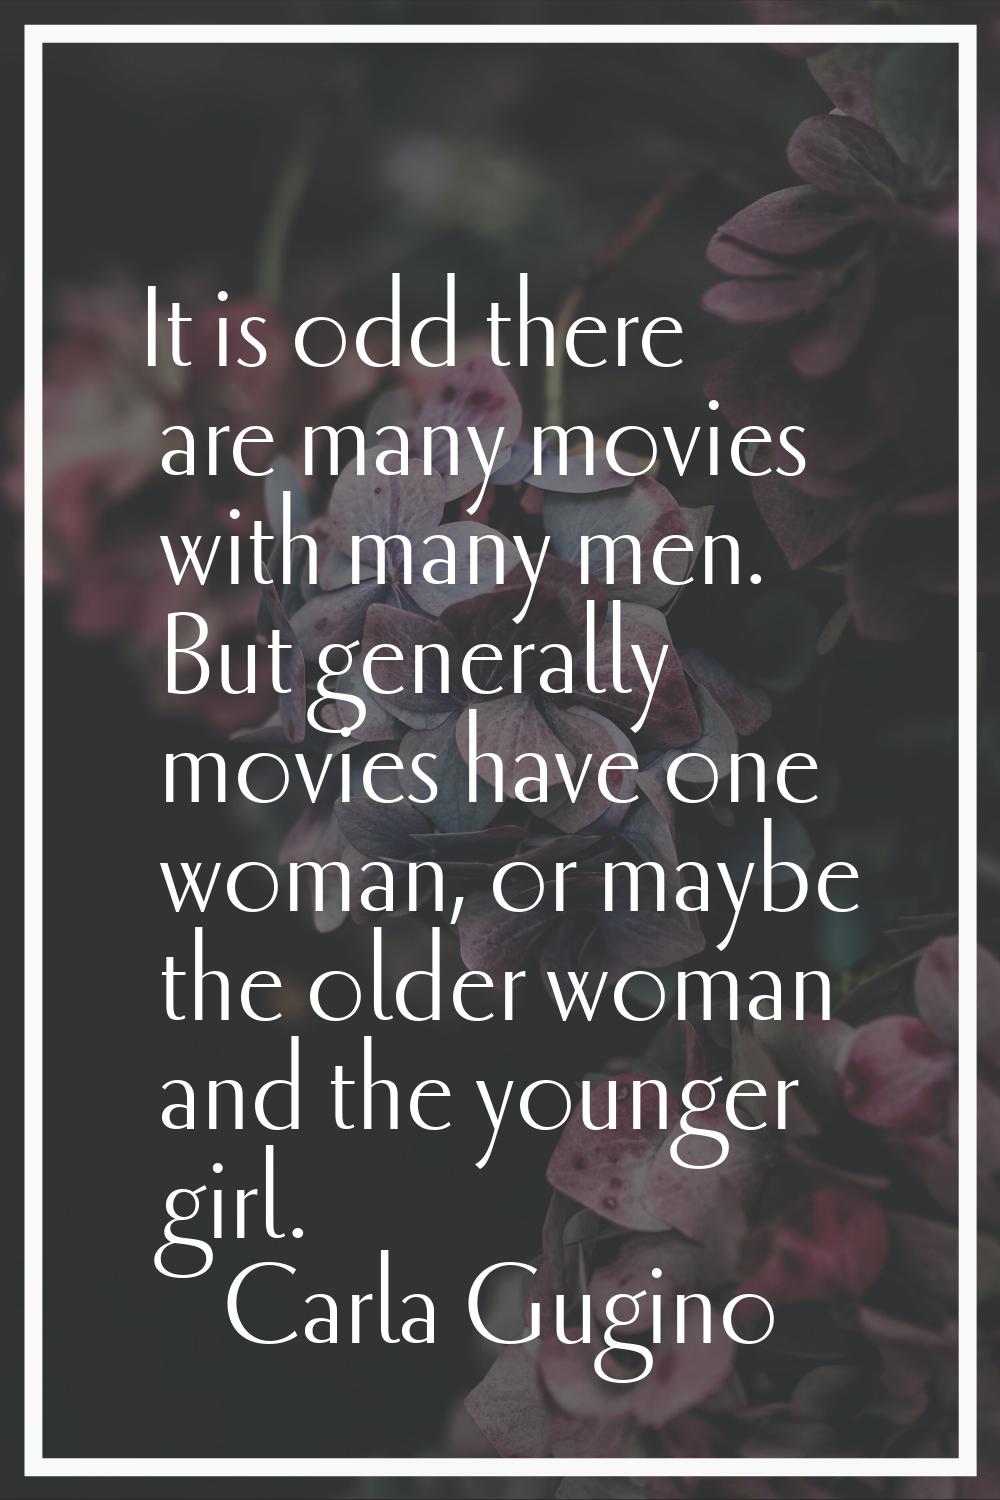 It is odd there are many movies with many men. But generally movies have one woman, or maybe the ol